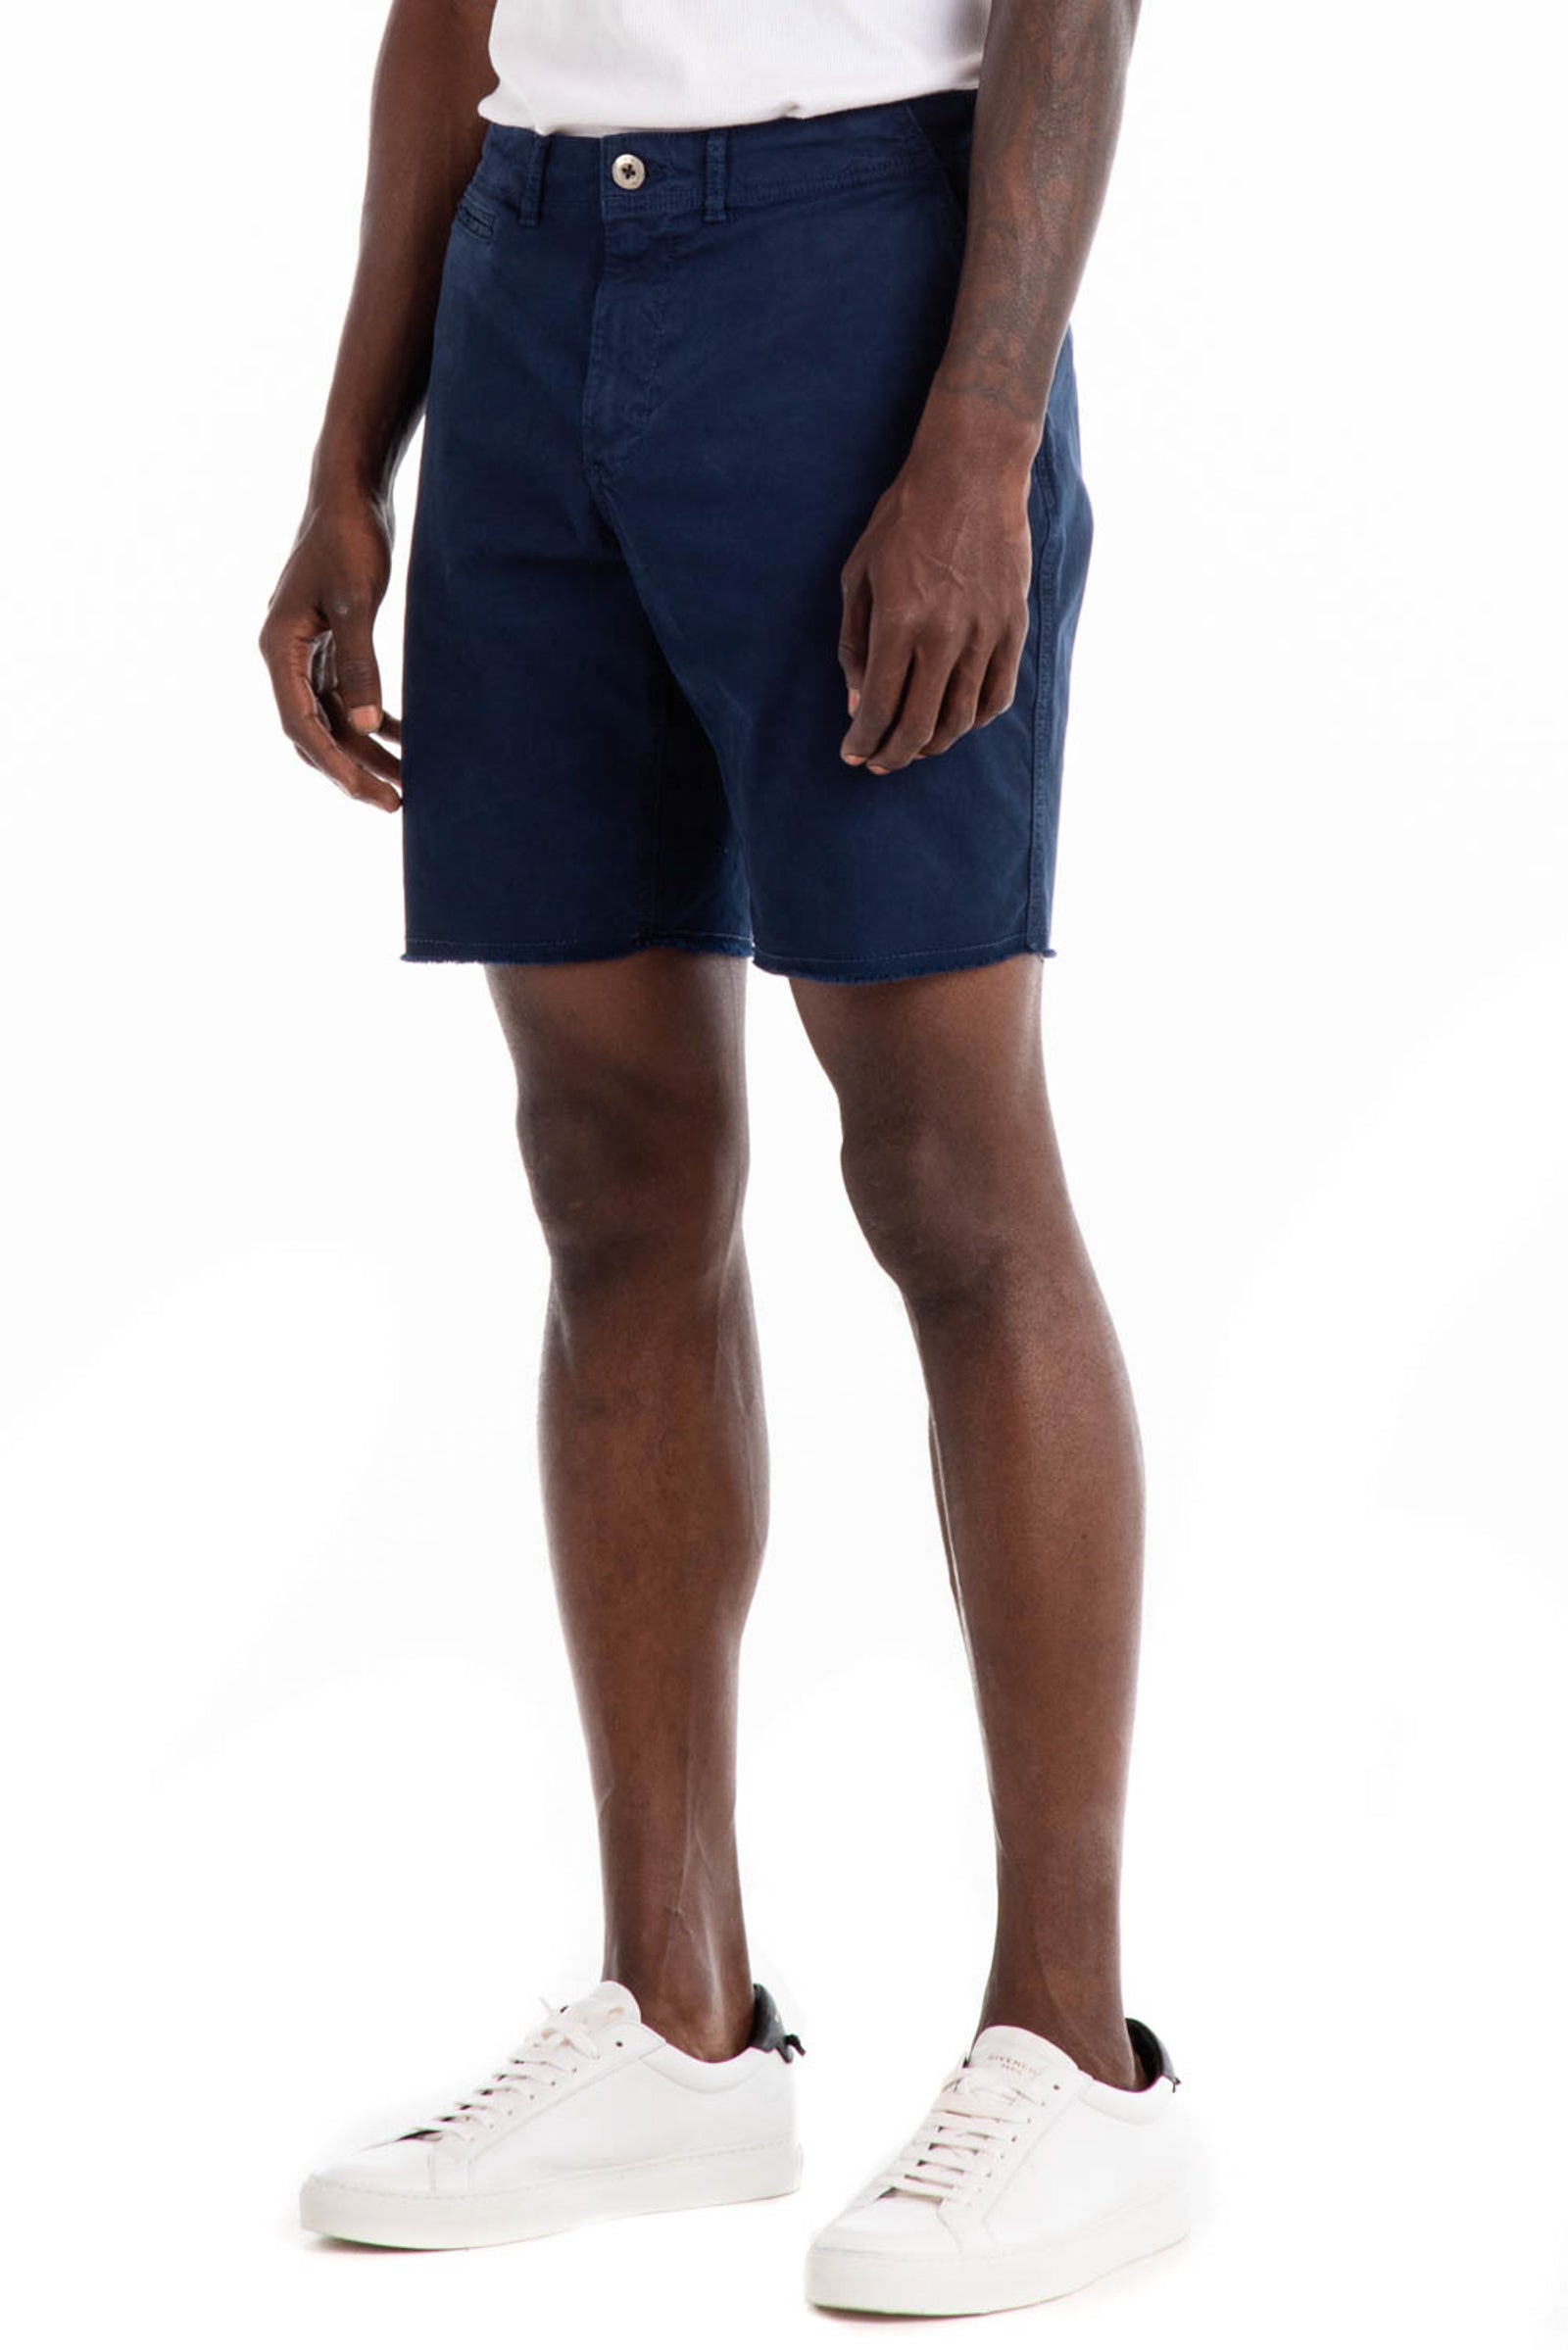 Original Paperbacks Brentwood Chino Short in Navy on Model Cropped Side View